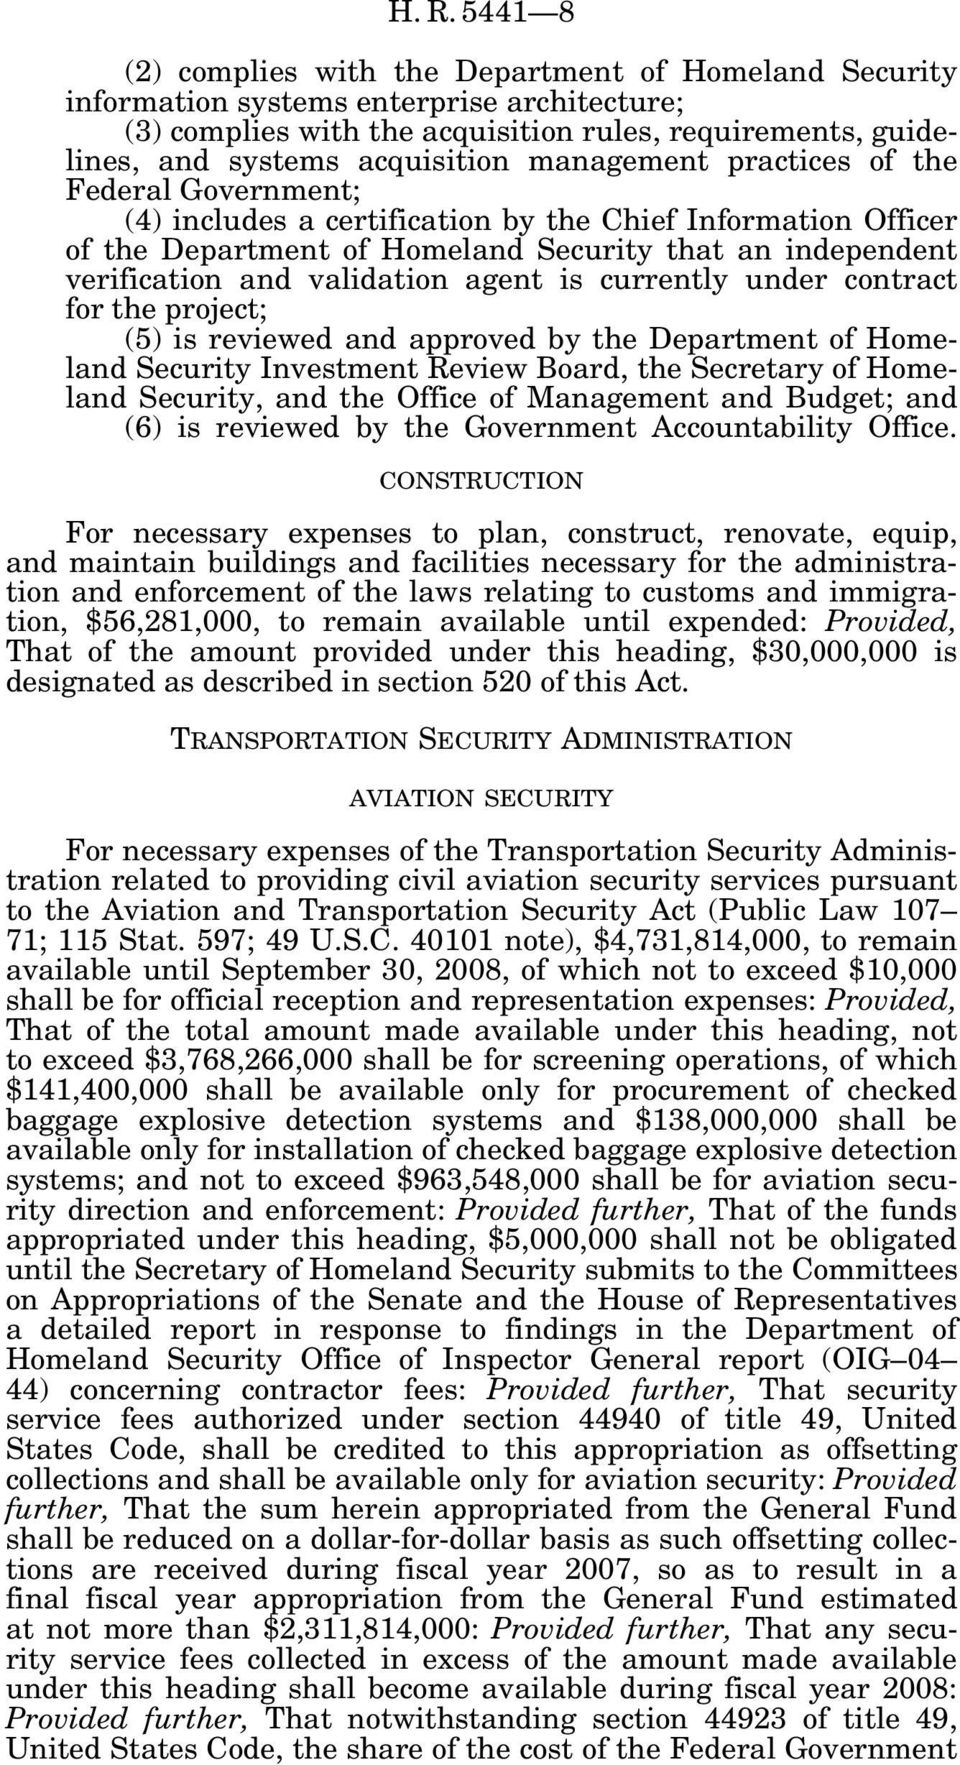 validation agent is currently under contract for the project; (5) is reviewed and approved by the Department of Homeland Security Investment Review Board, the Secretary of Homeland Security, and the